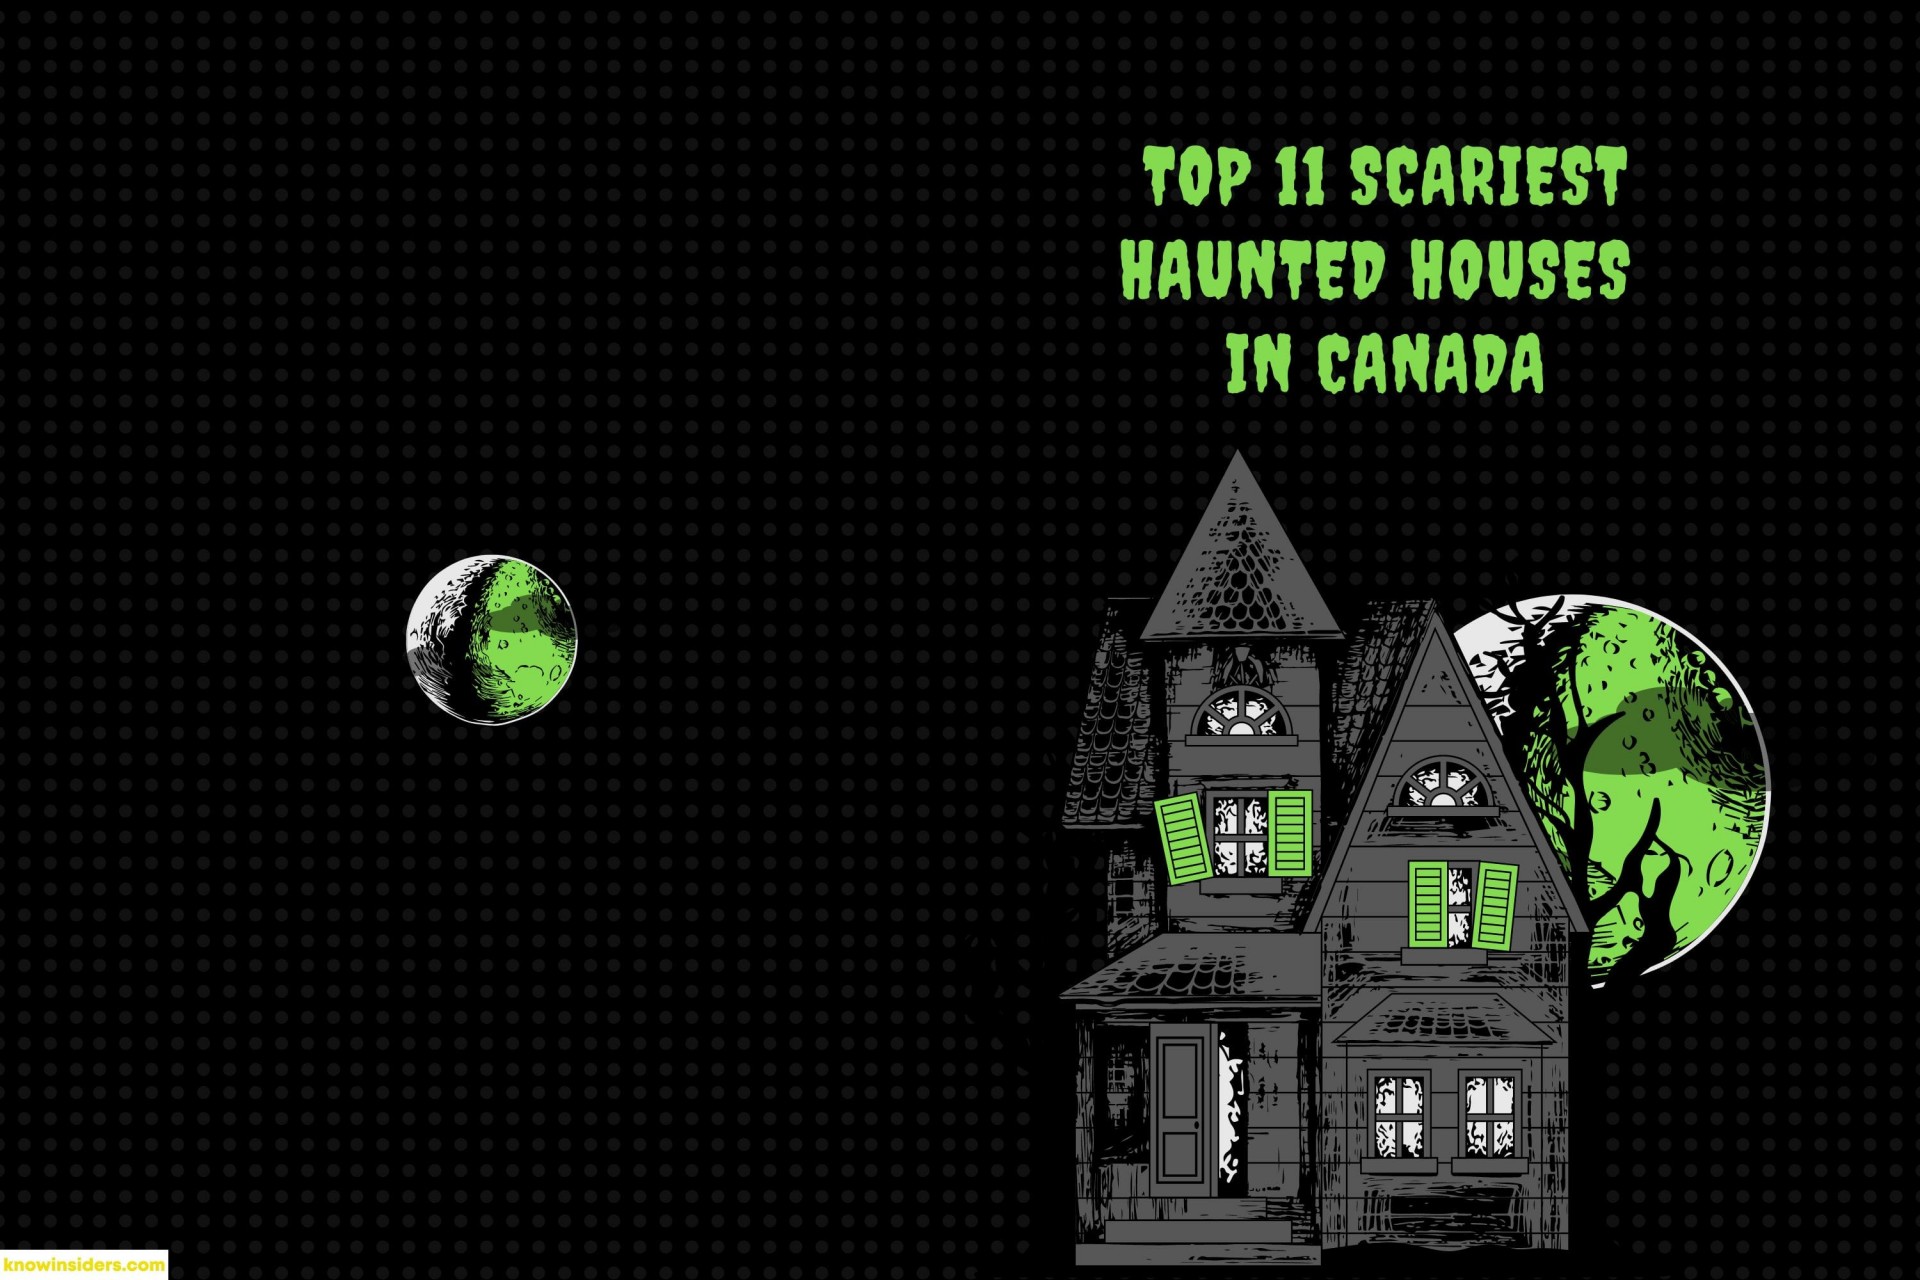 Top 11 Scariest Haunted & Ghost Houses In Canada